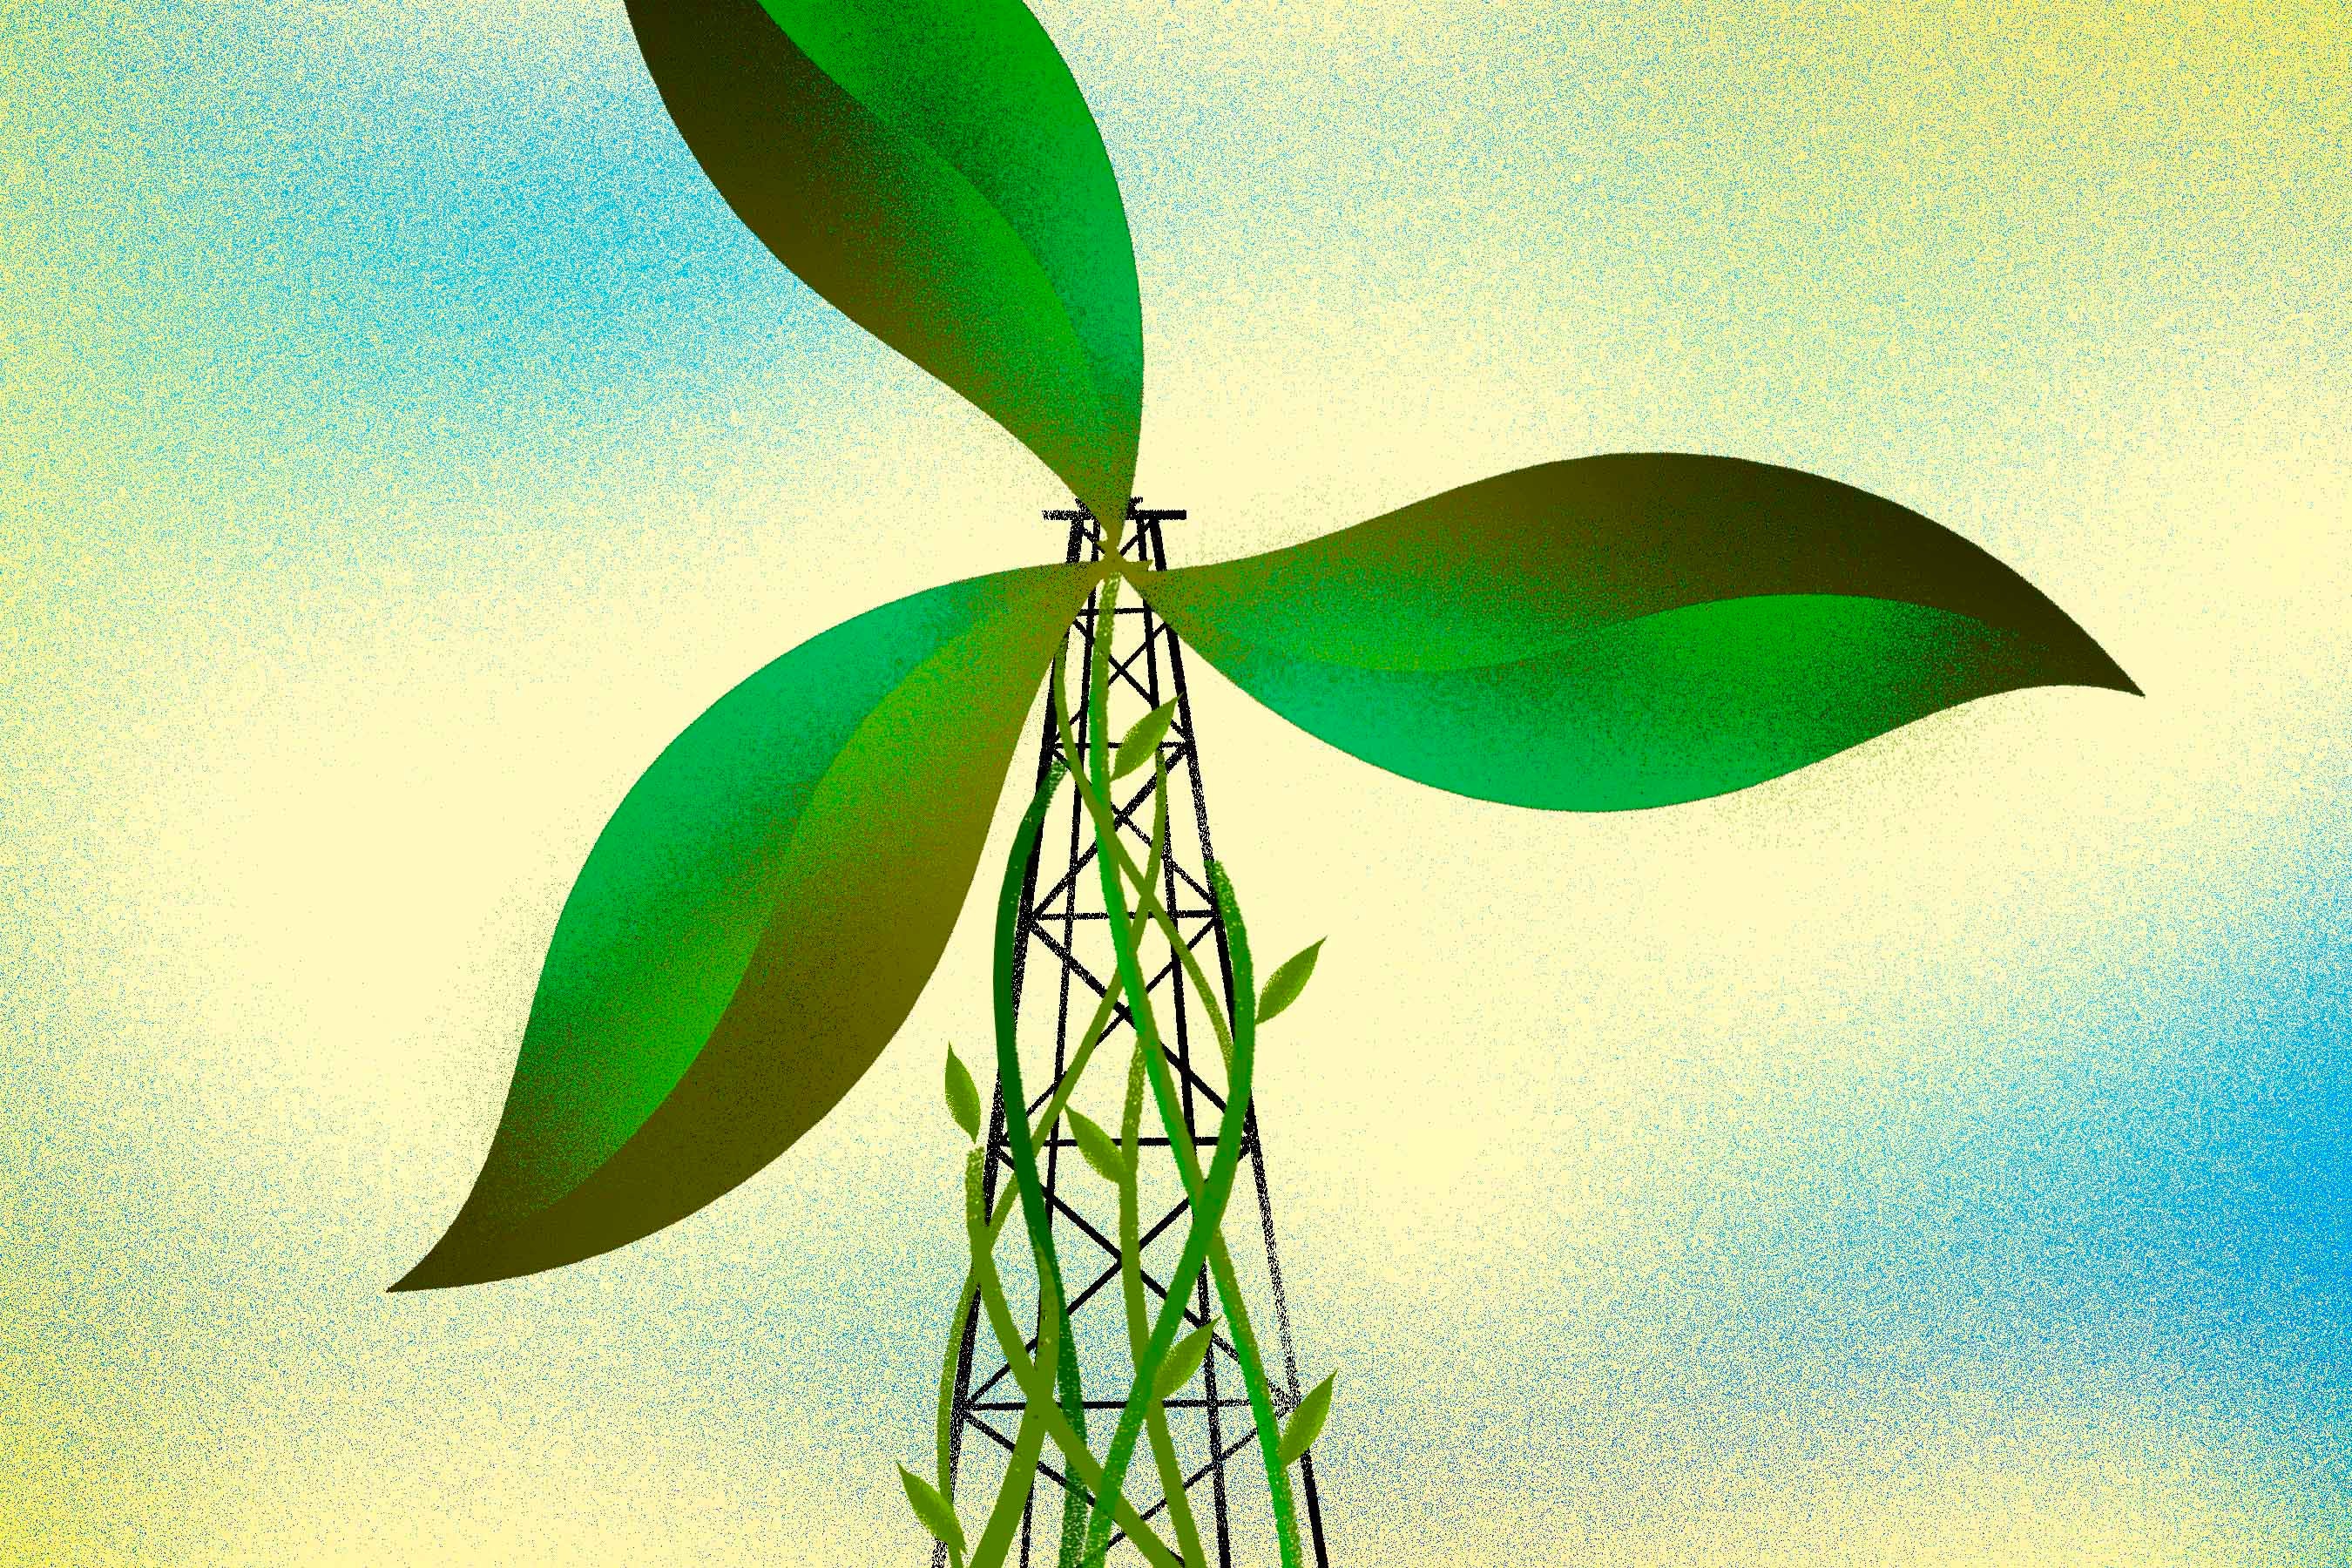 Illustration of a windmill with leaves for blades